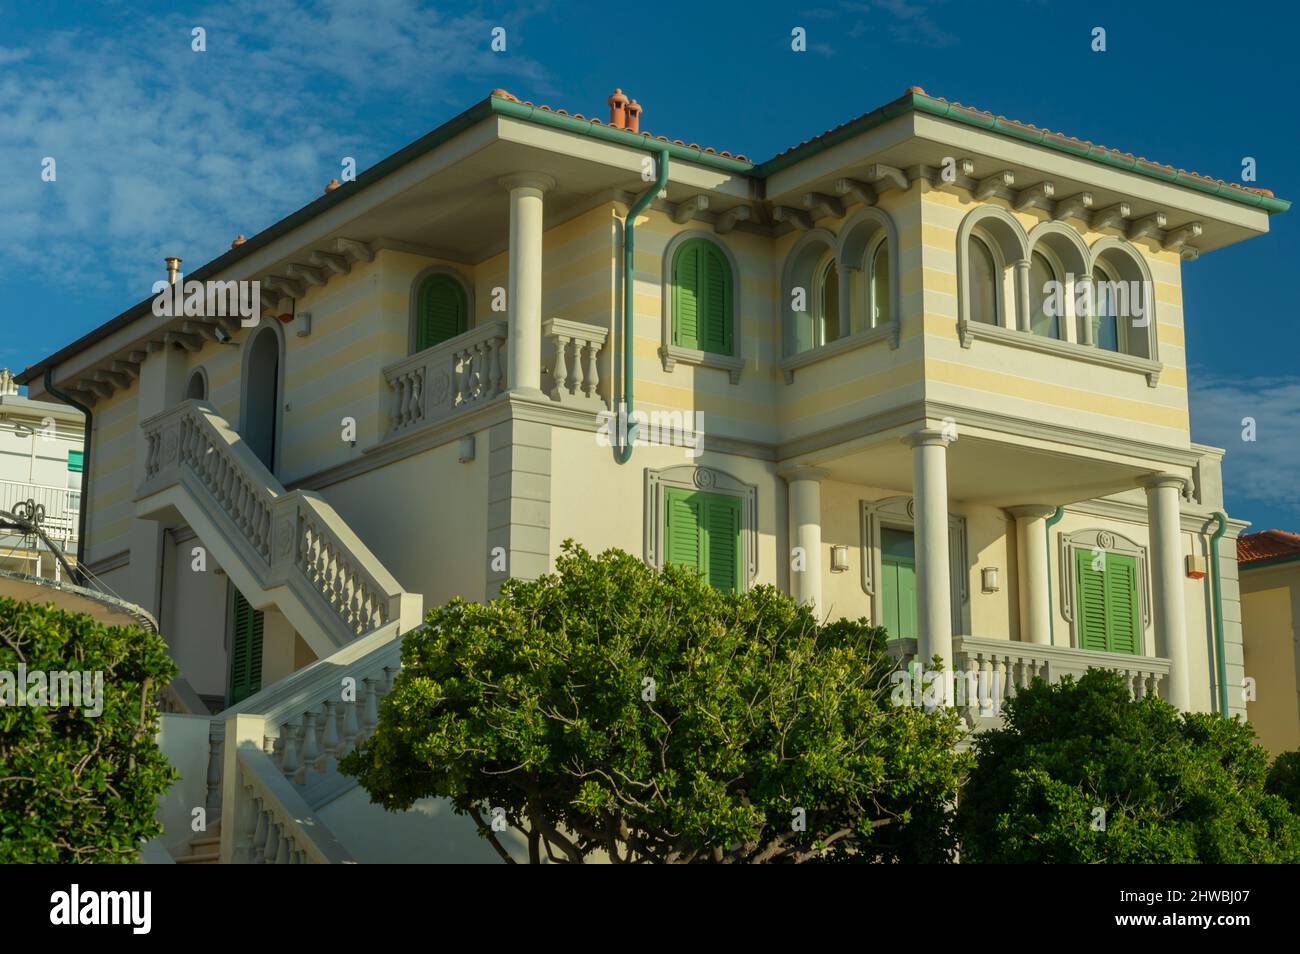 Beautiful Tuscan style seaside villa with columns, arches and green shutters Stock Photo